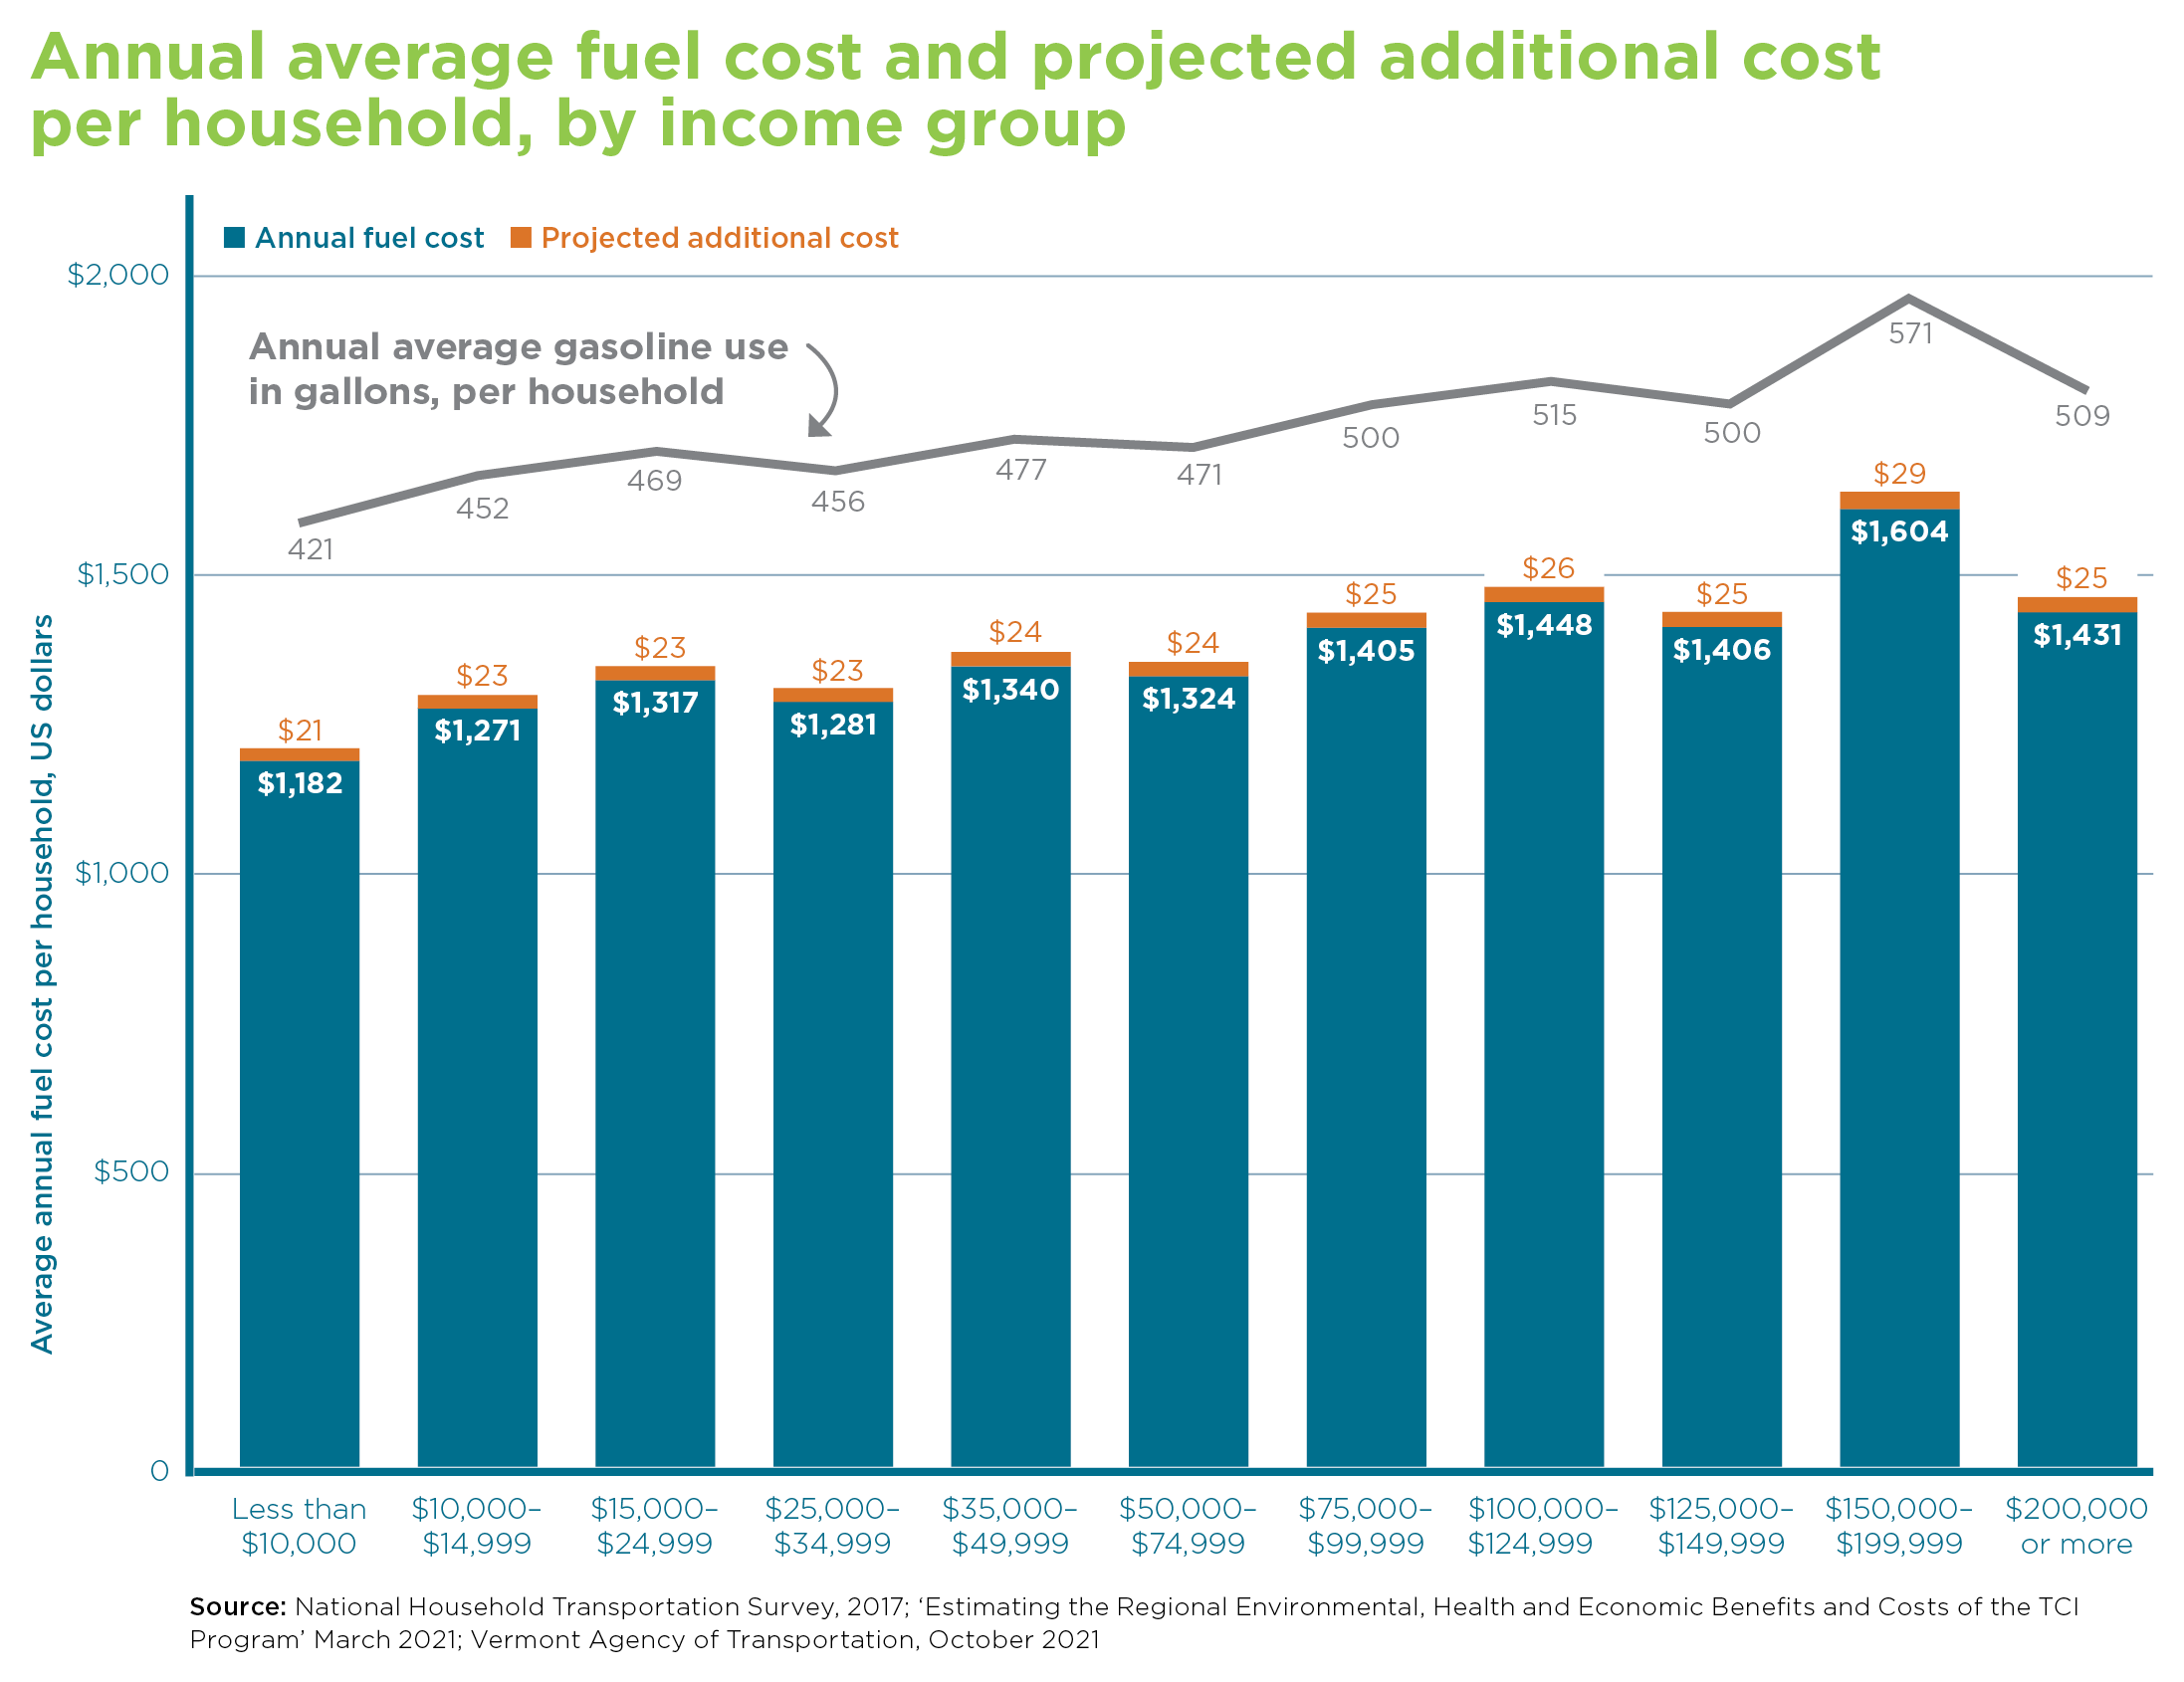 The projected cost per household in VT as a result of TCI